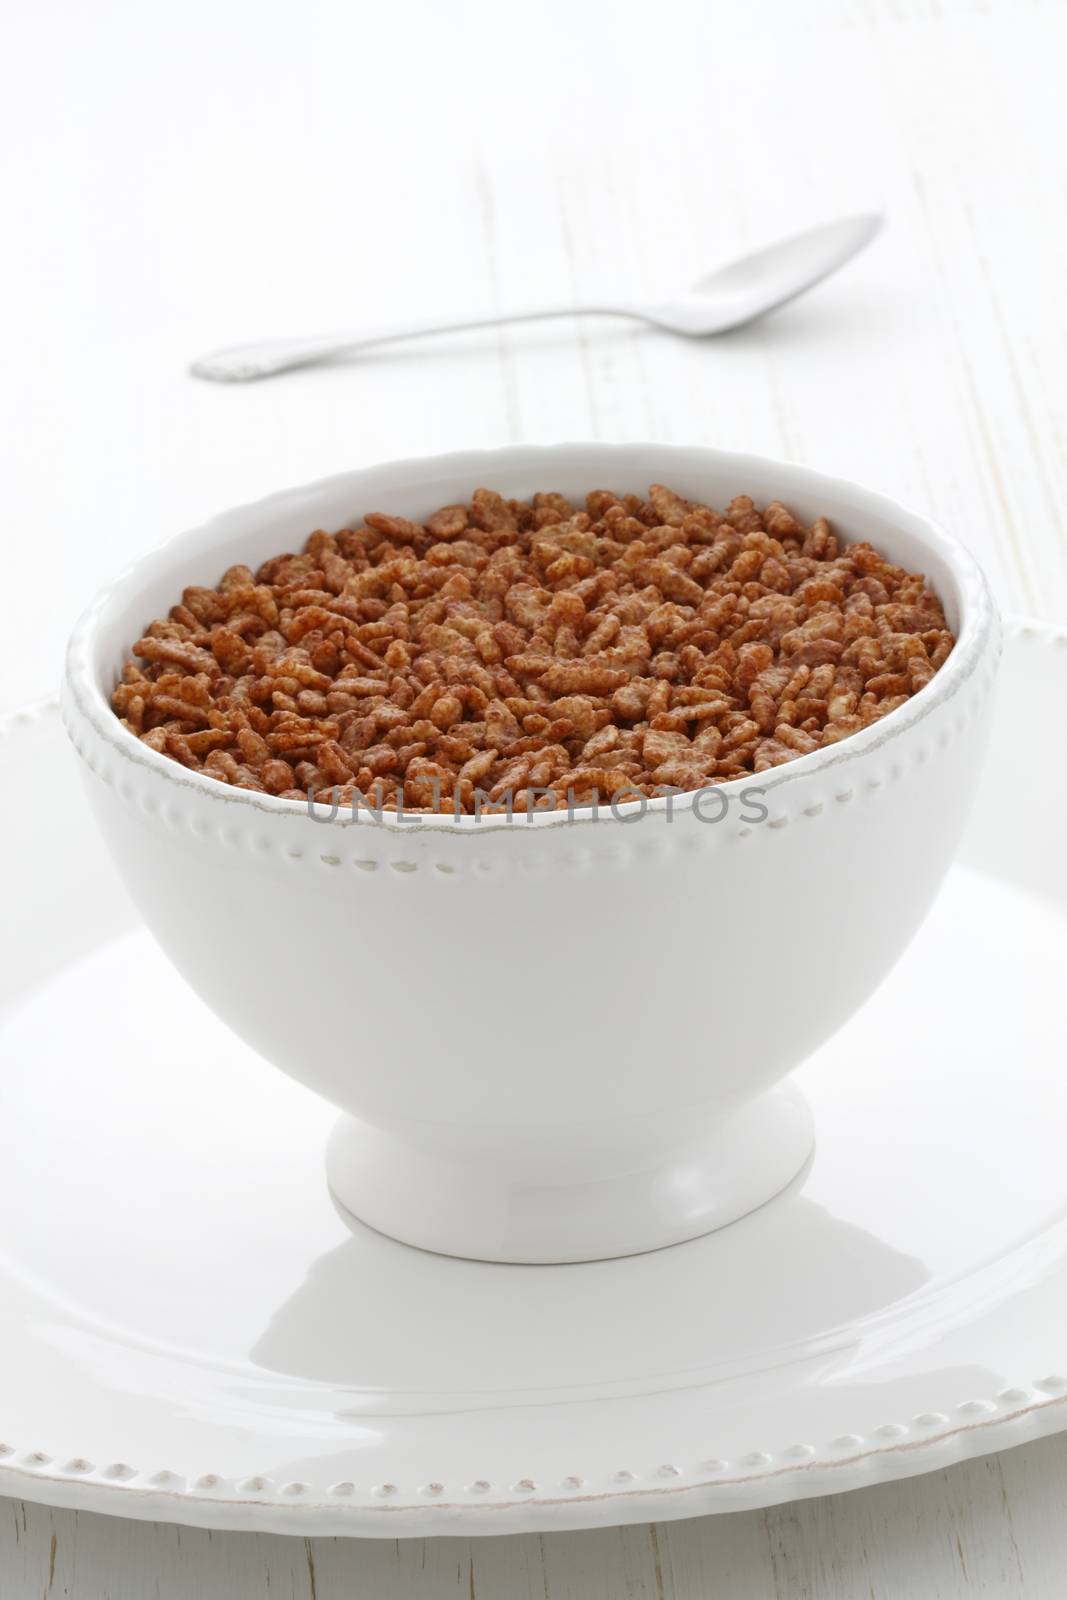 Delicious crisped rice chocolate cereal  by tacar